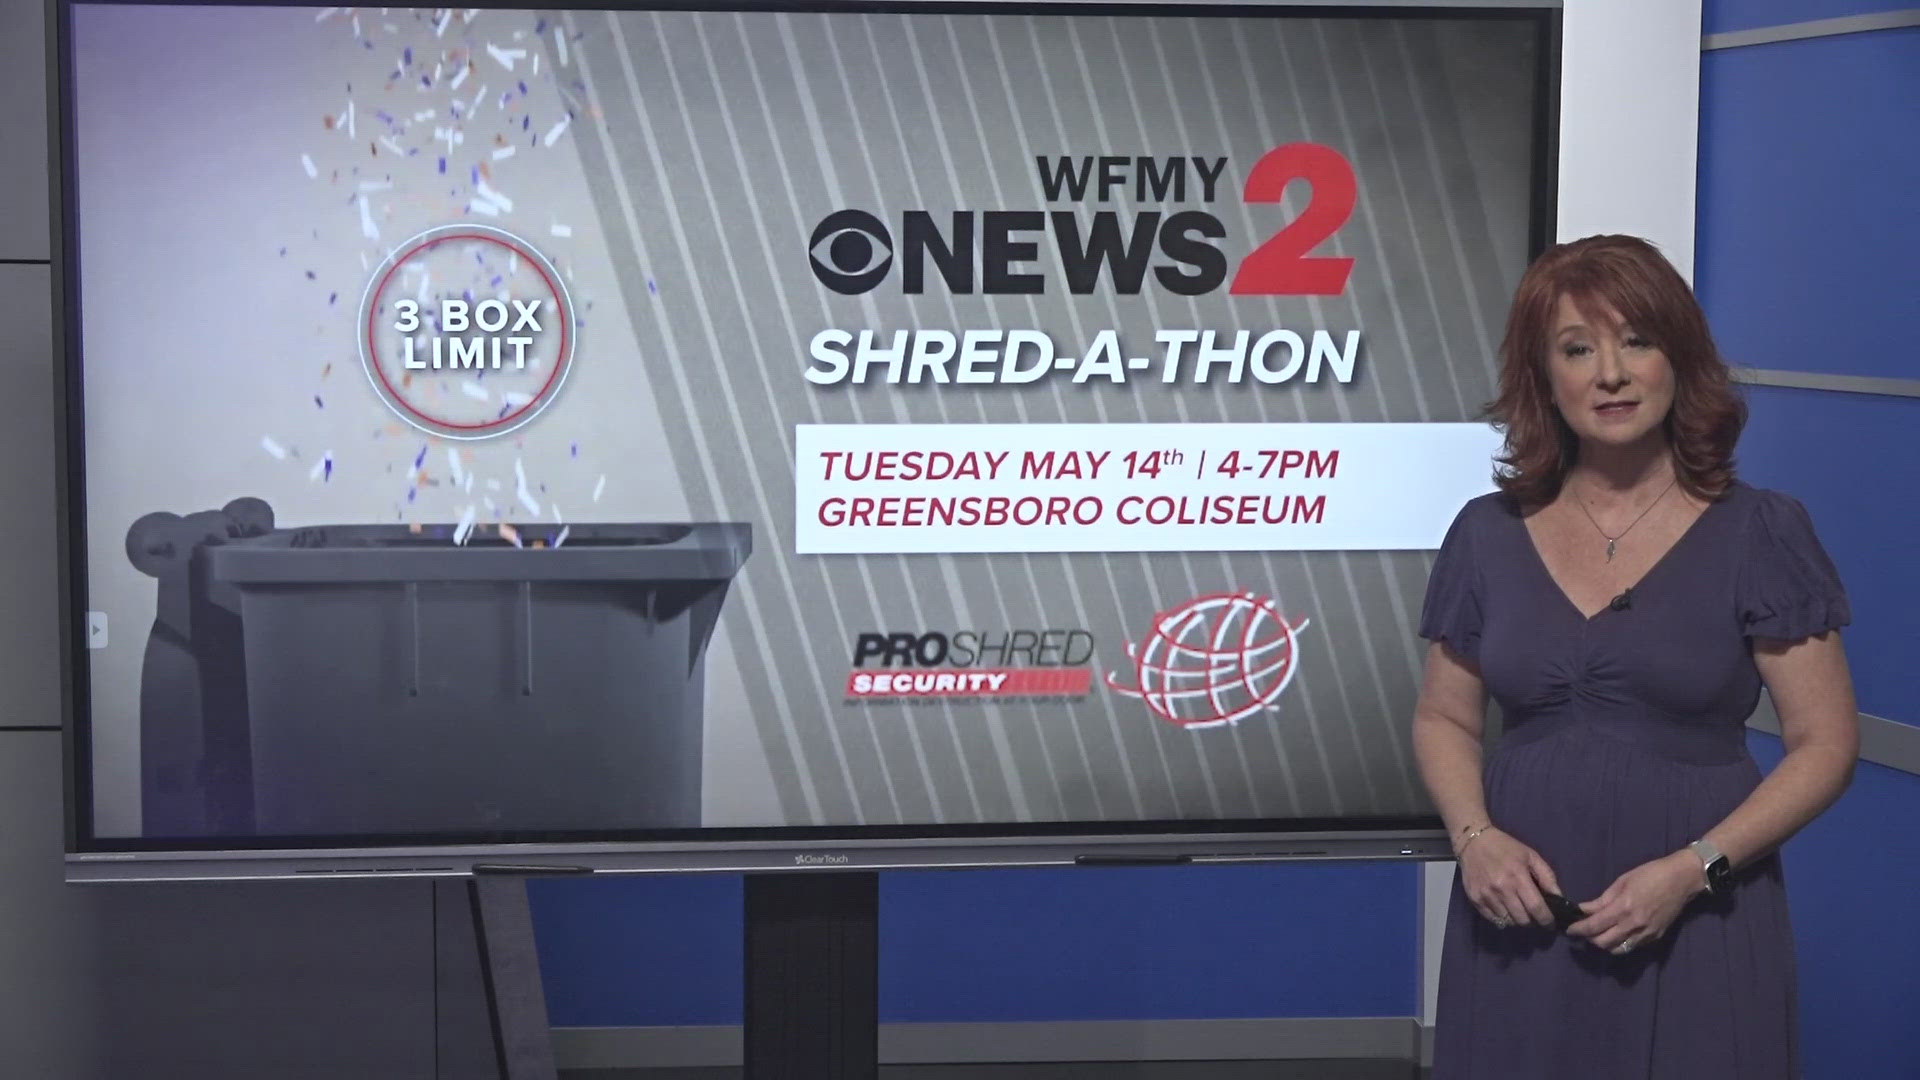 2WTK Tanya Rivera explains what you can bring to the WFMY News 2 Shred-a-thon.